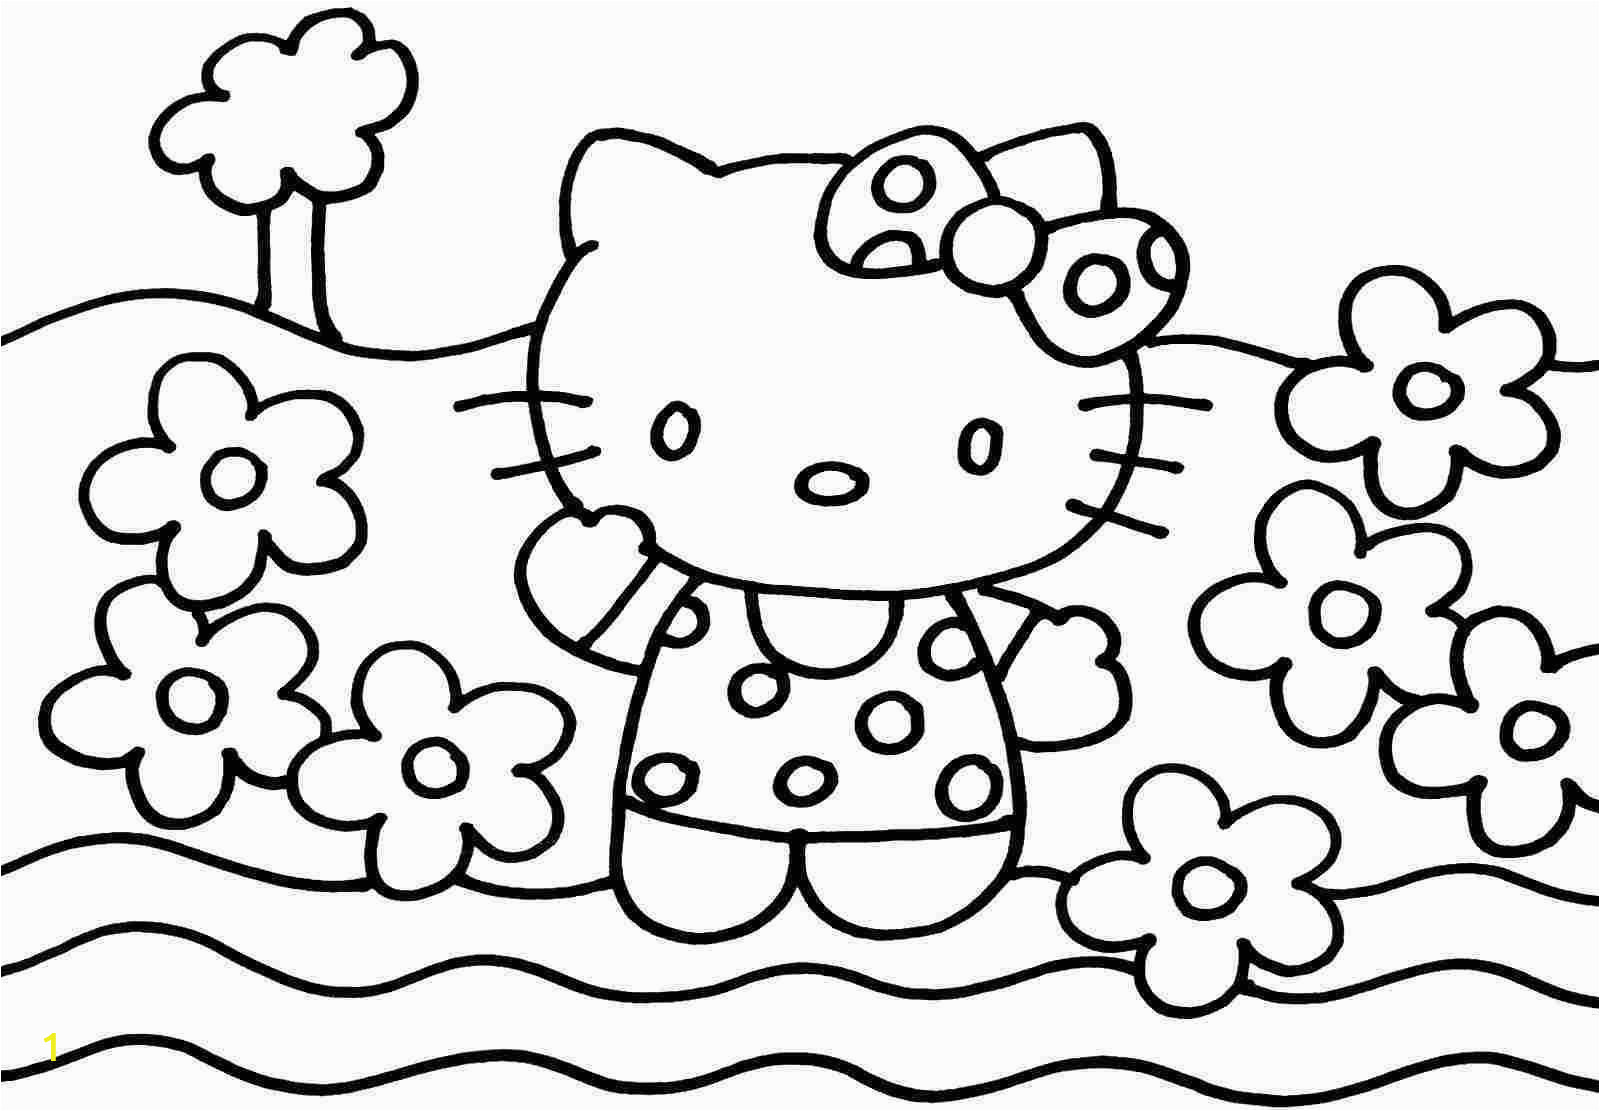 Coloring Pages Hello Kitty and Friends Hello Kitty Coloring Pages Games